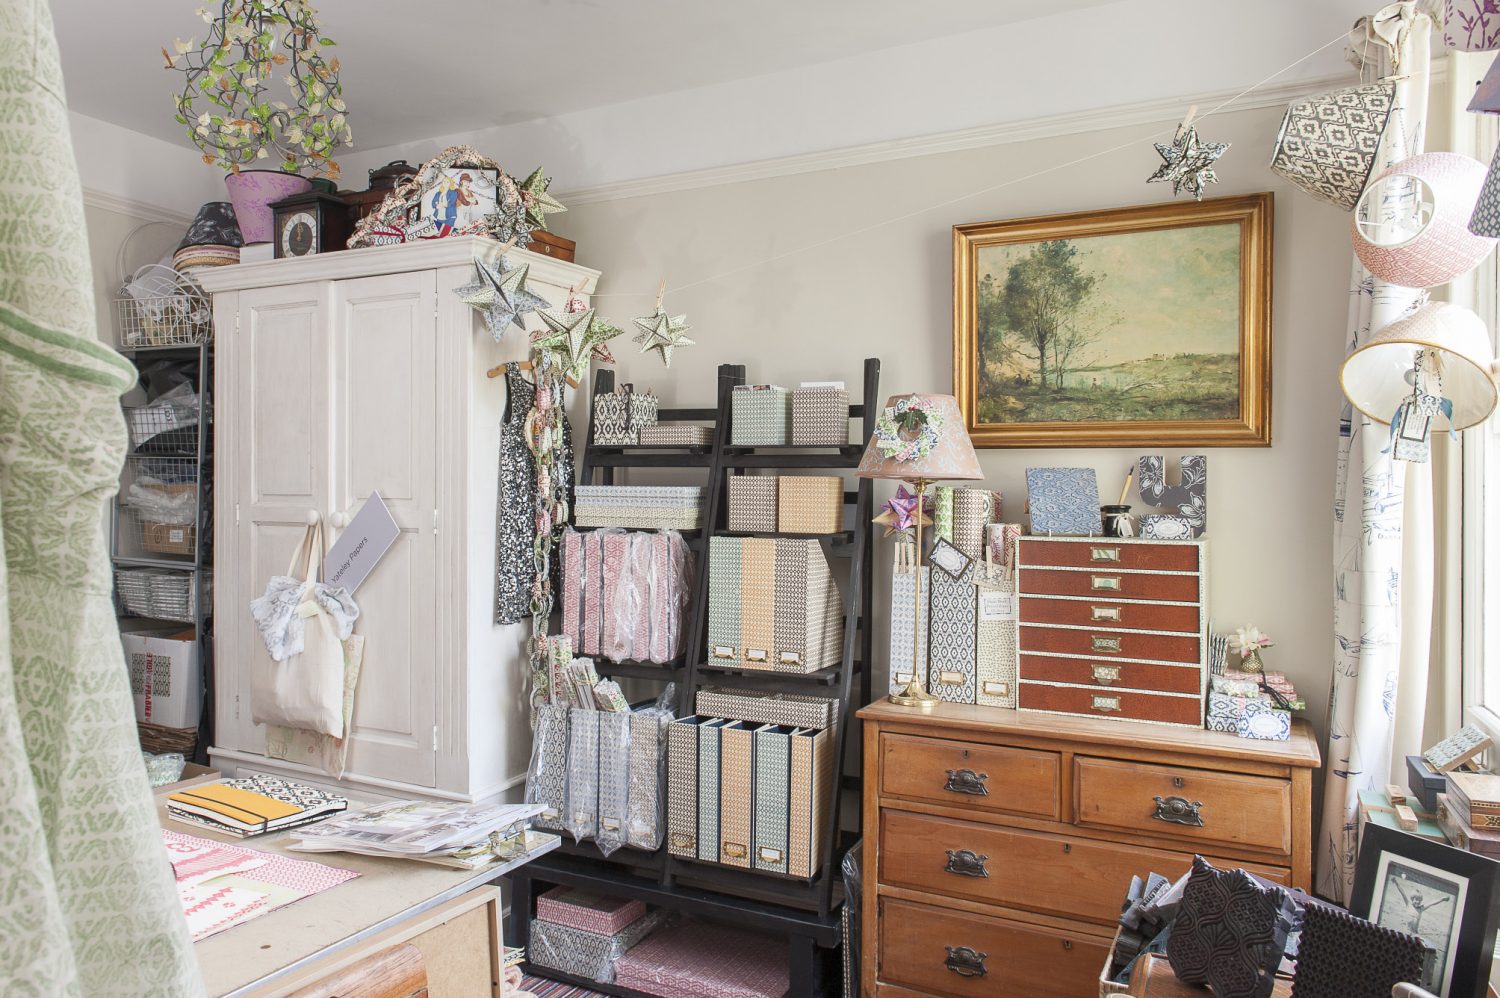 Trudi’s workroom shelves are stacked with files in pretty prints, papers and prototypes